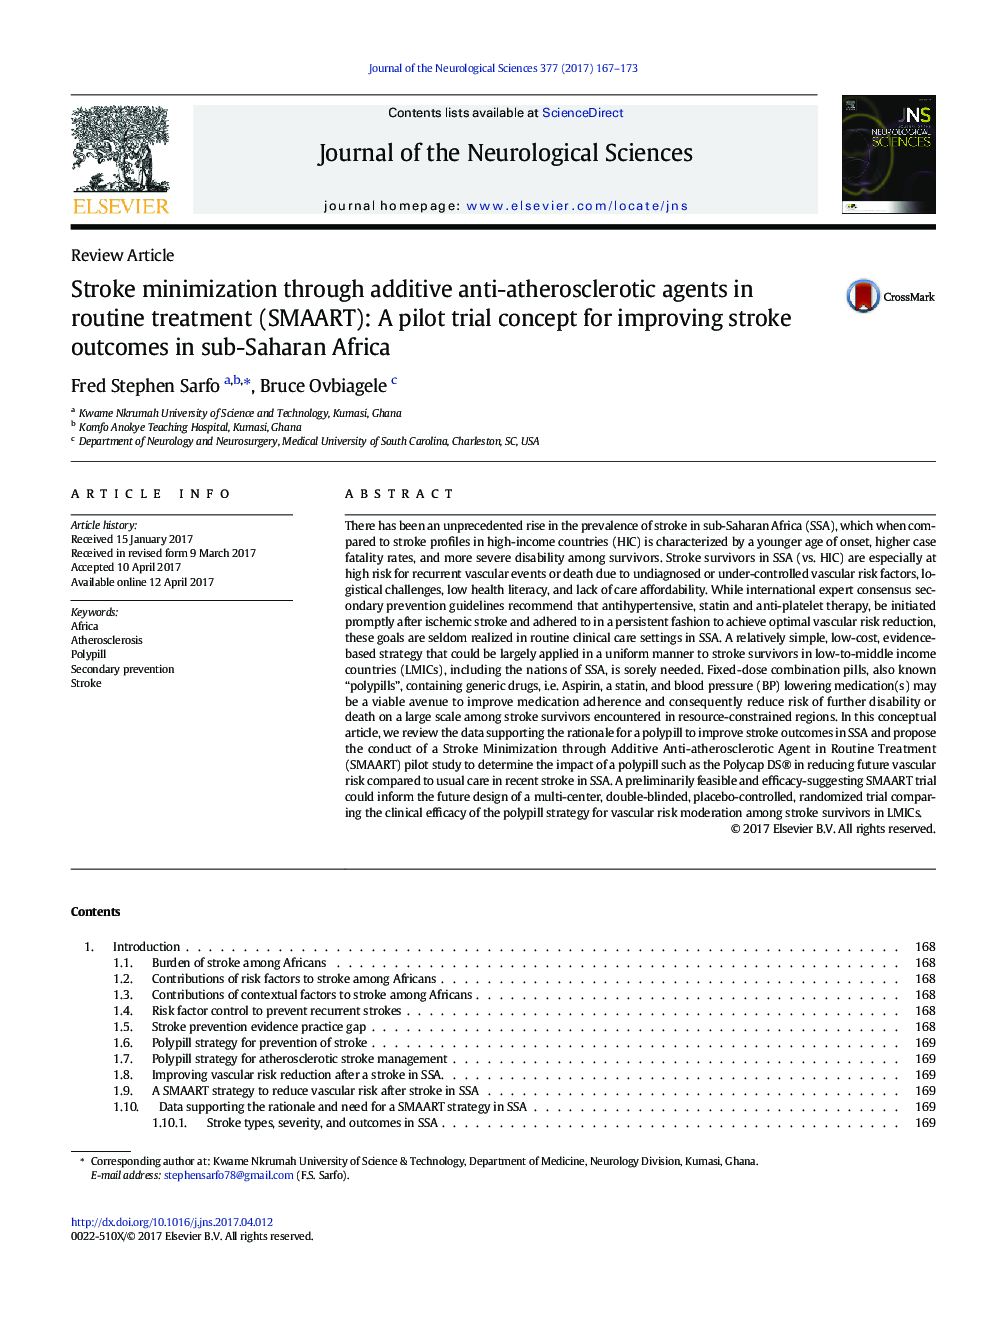 Stroke minimization through additive anti-atherosclerotic agents in routine treatment (SMAART): A pilot trial concept for improving stroke outcomes in sub-Saharan Africa